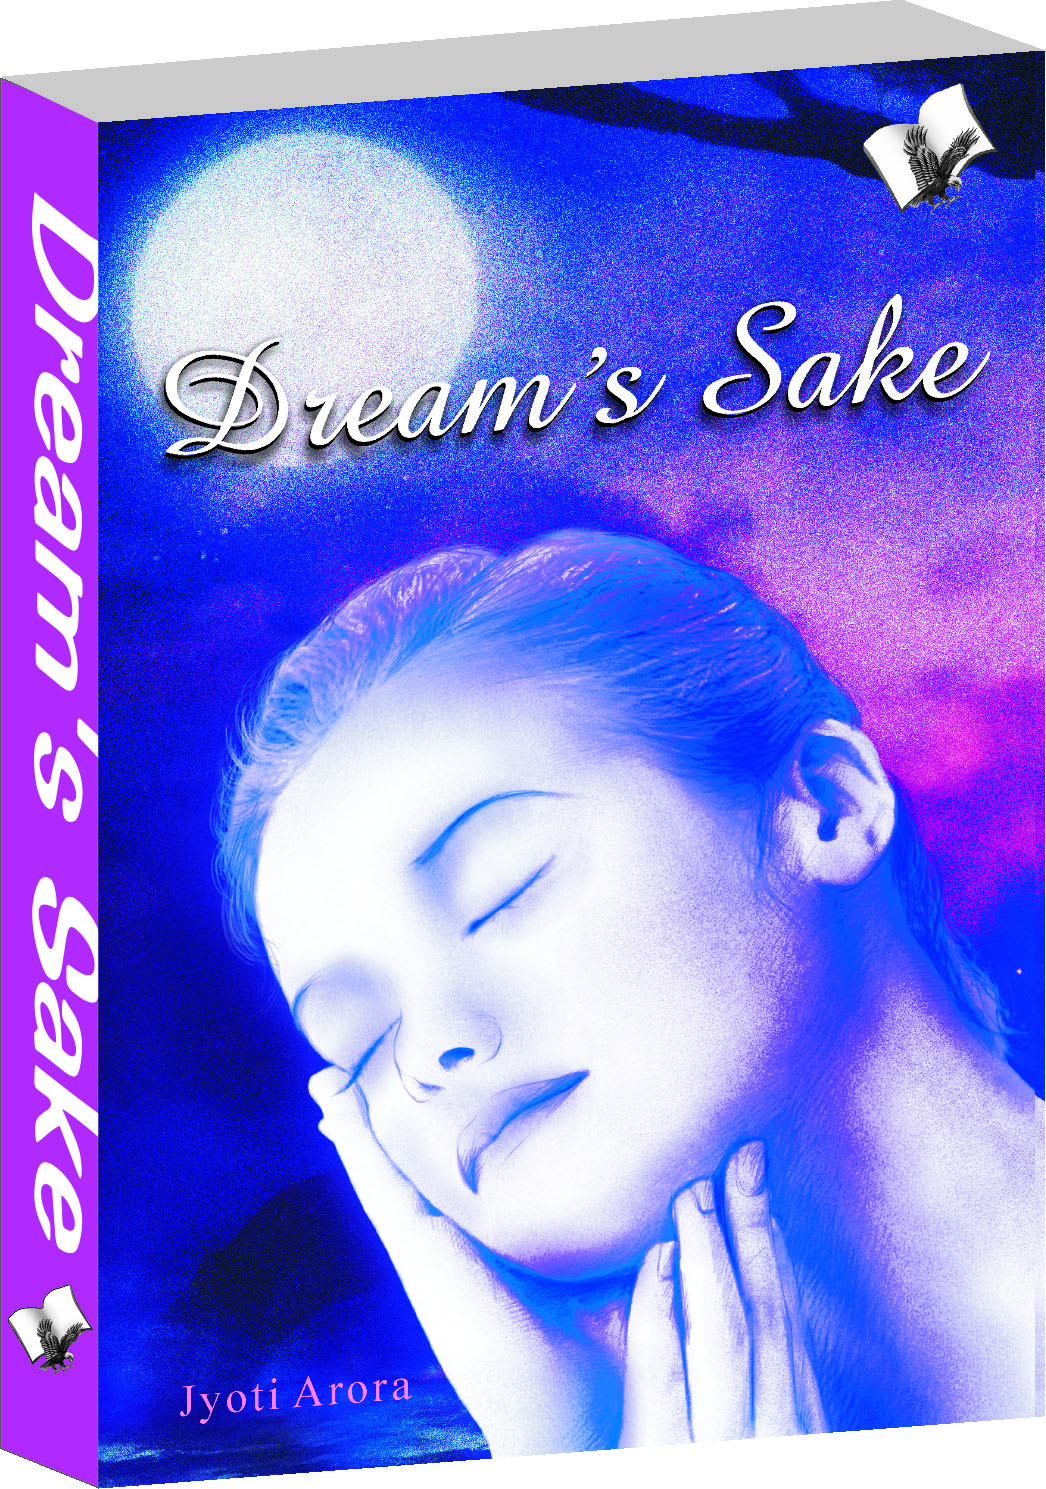 Dream's Sake-Story based on love and romance for young adults